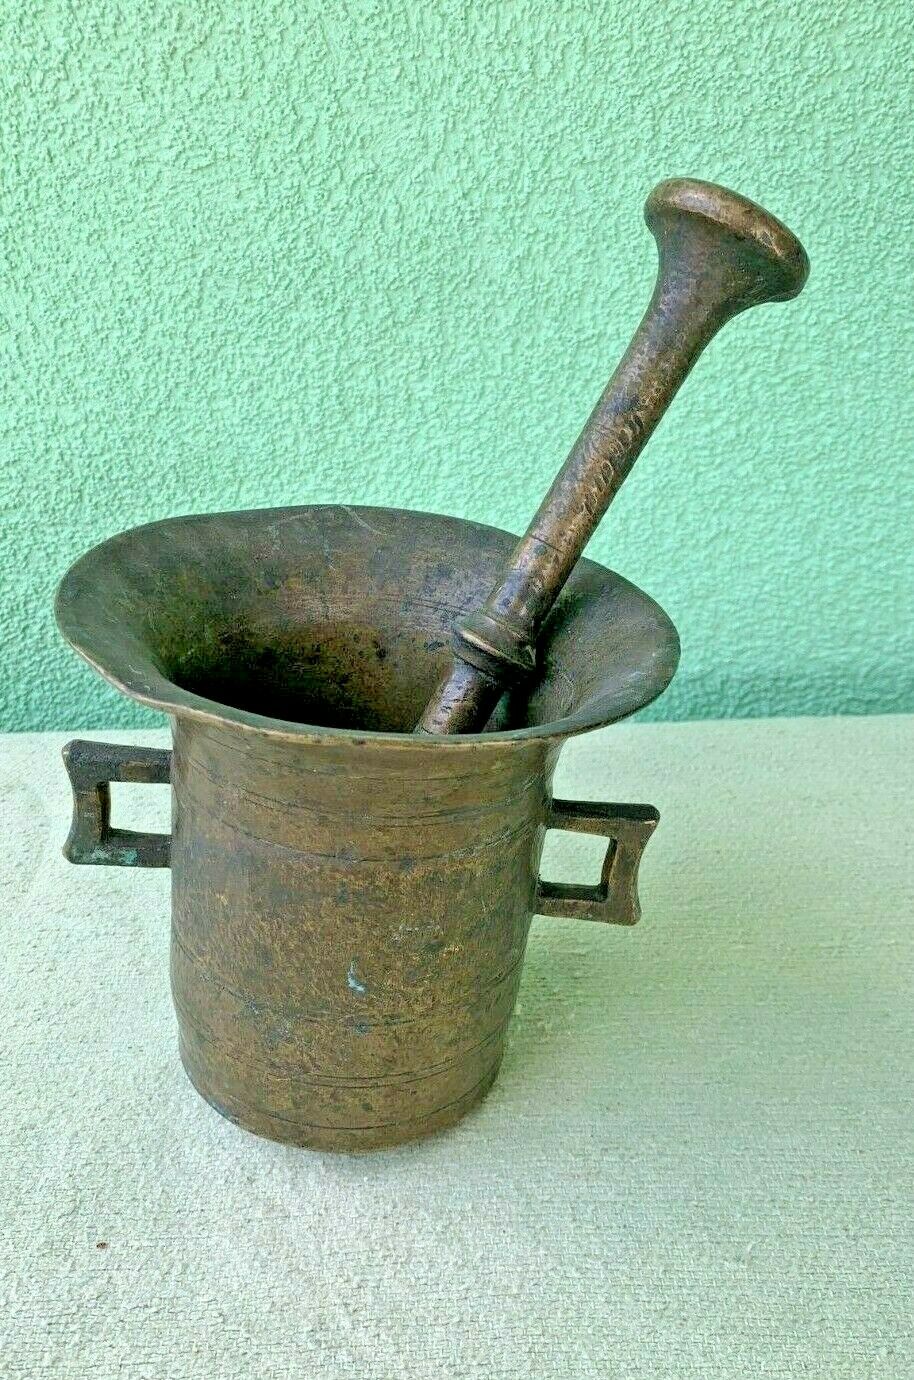 Vintage Heavy Brass Mortal and Pestle Antique Pharmacy Apothecary Ussr Soviet 5